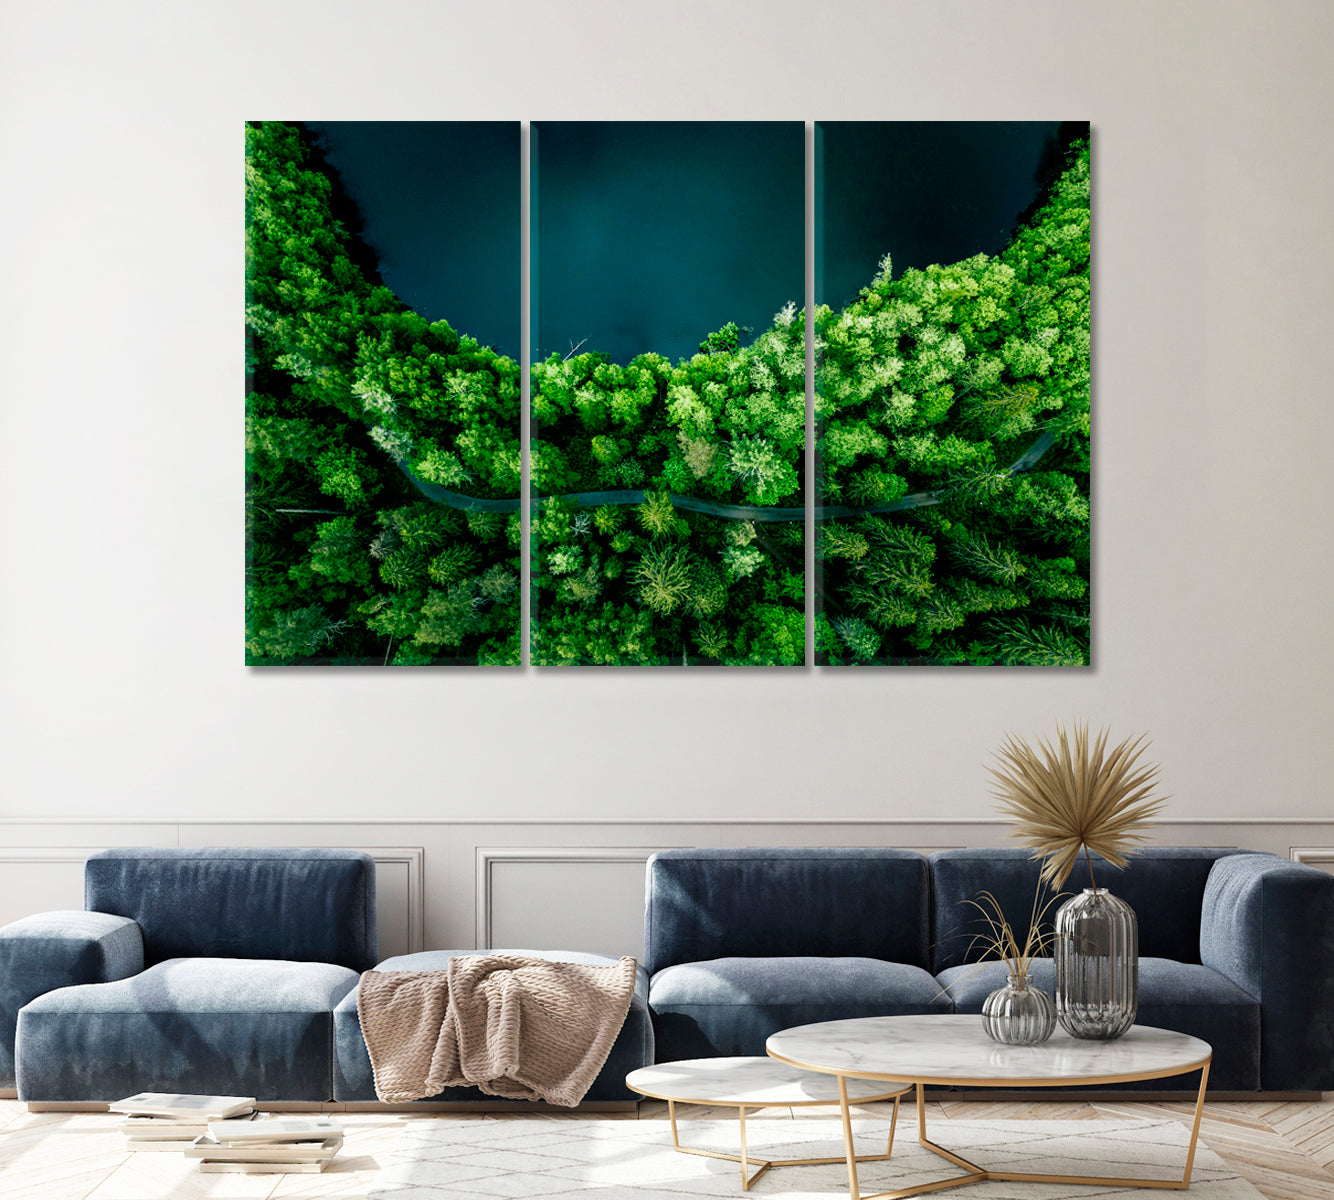 Country Road Between Green Forest and Blue Lake in Finland Canvas Print ArtLexy 3 Panels 36"x24" inches 